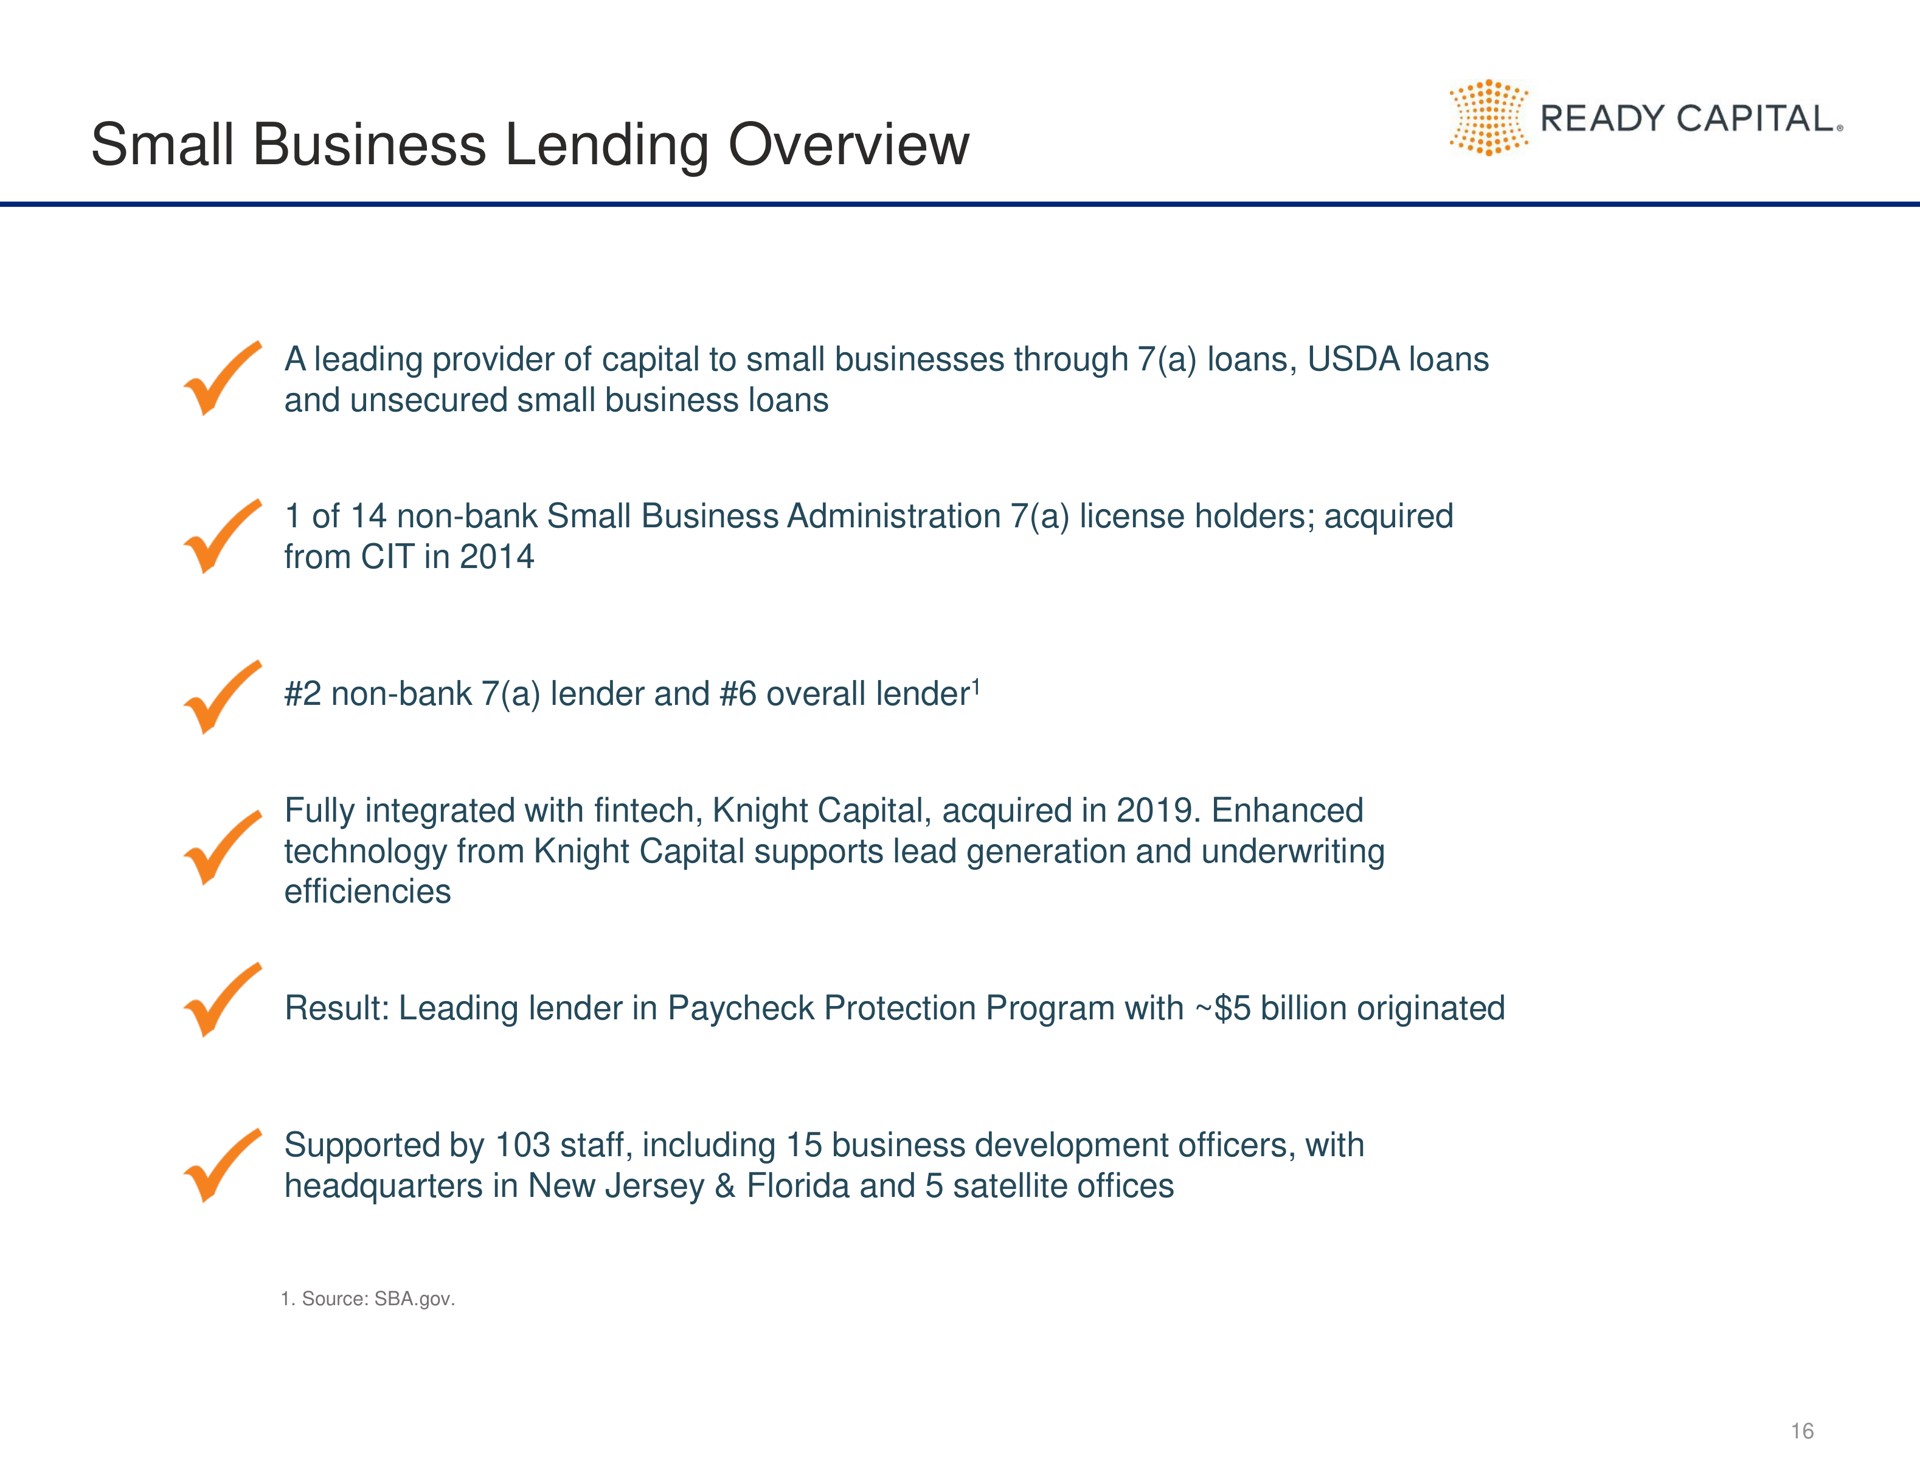 small business lending overview ready capital a | Ready Capital